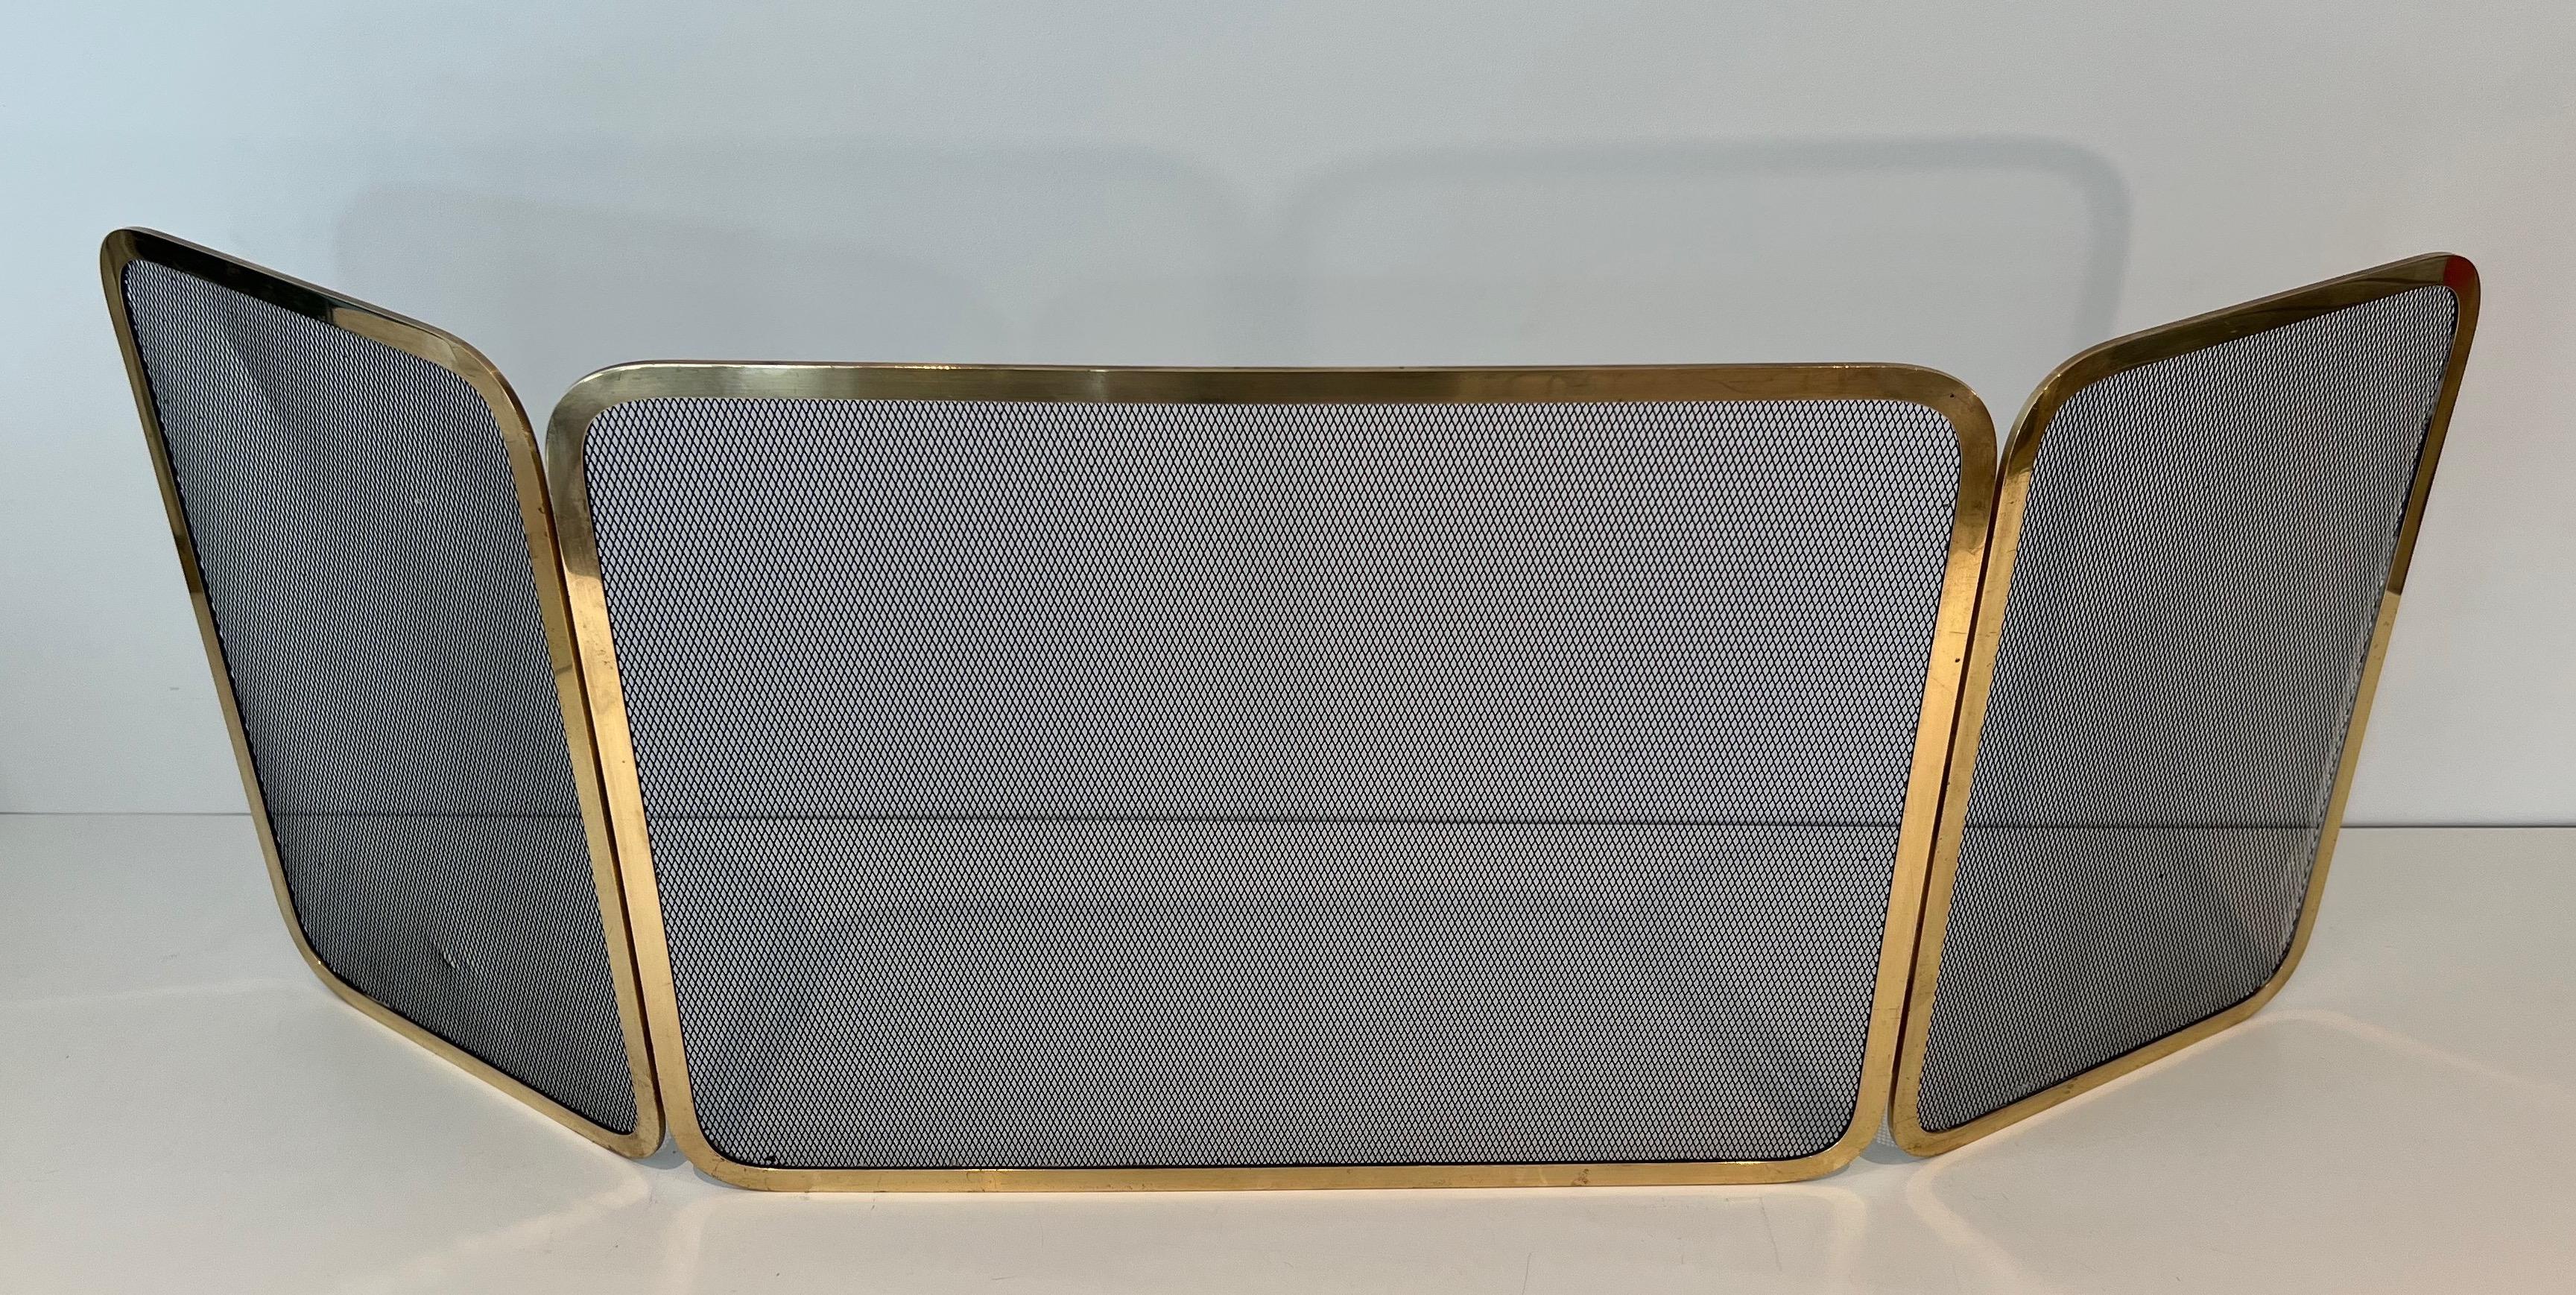 This very nice and elegant fireplace screen is made of brass and grilling 3 panels fireplace screen. This fireguards is made of 3 brass panels with grilling inside. The width of the fireplace screen can be adjusted by moving these panels. This is a